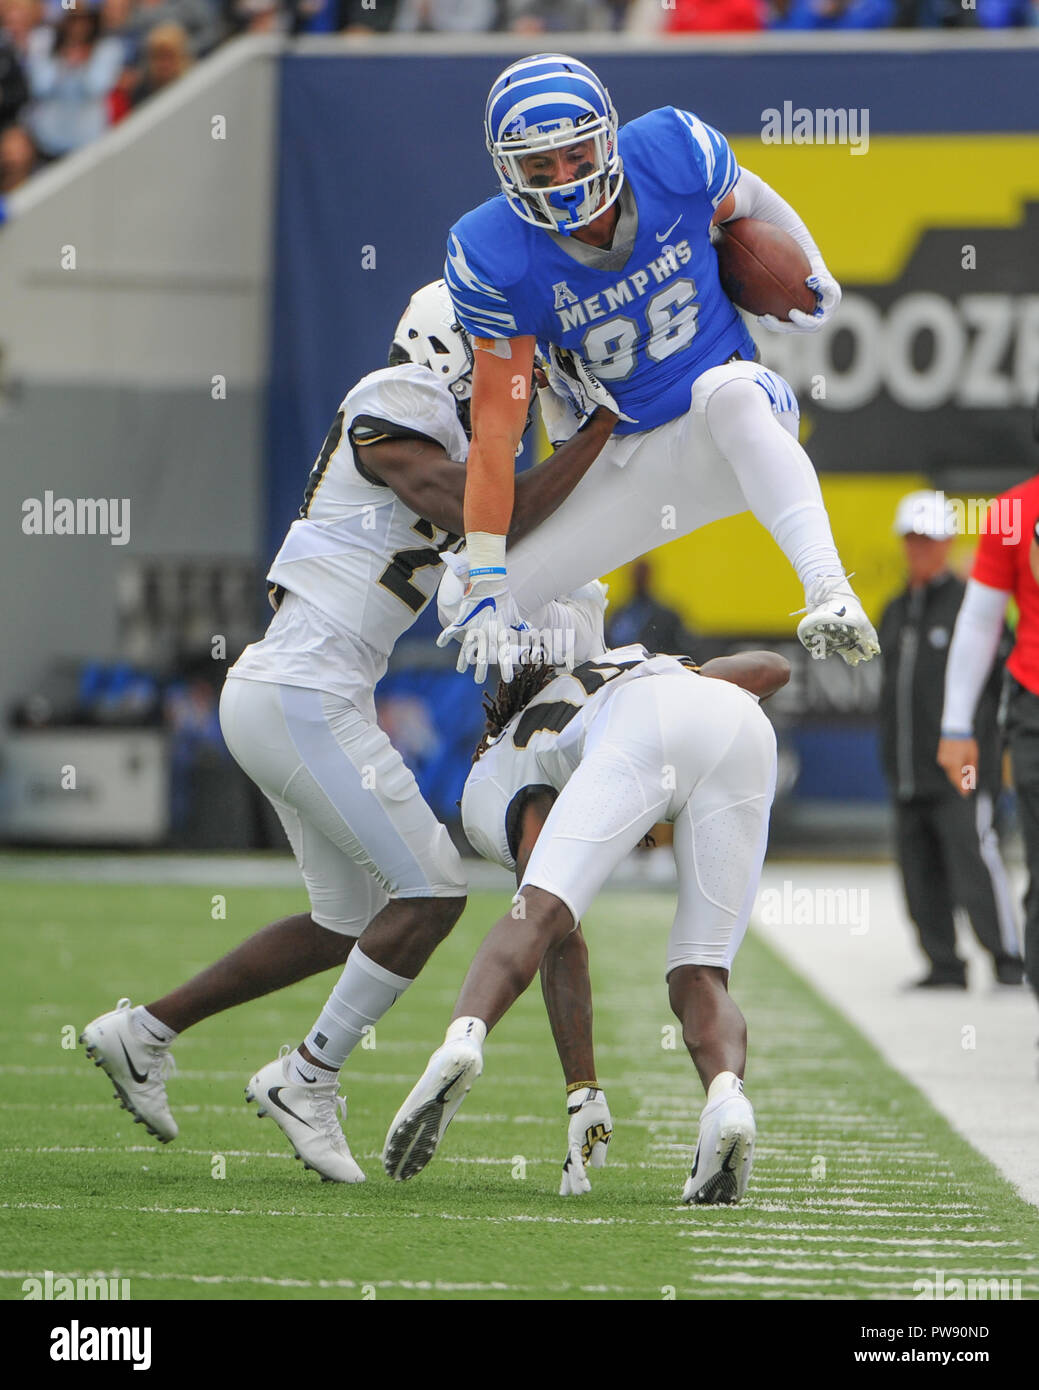 October 13, 2018: Memphis Tigers tight end, JOEY MAGNIFICO (86), jumps over the UCF defense during the NCAA football game between the Memphis Tigers and the Central Florida Knights at Liberty Bowl Stadium in Memphis, TN. Memphis leads UCF at the half, 30-17. Kevin Langley/CSM Stock Photo